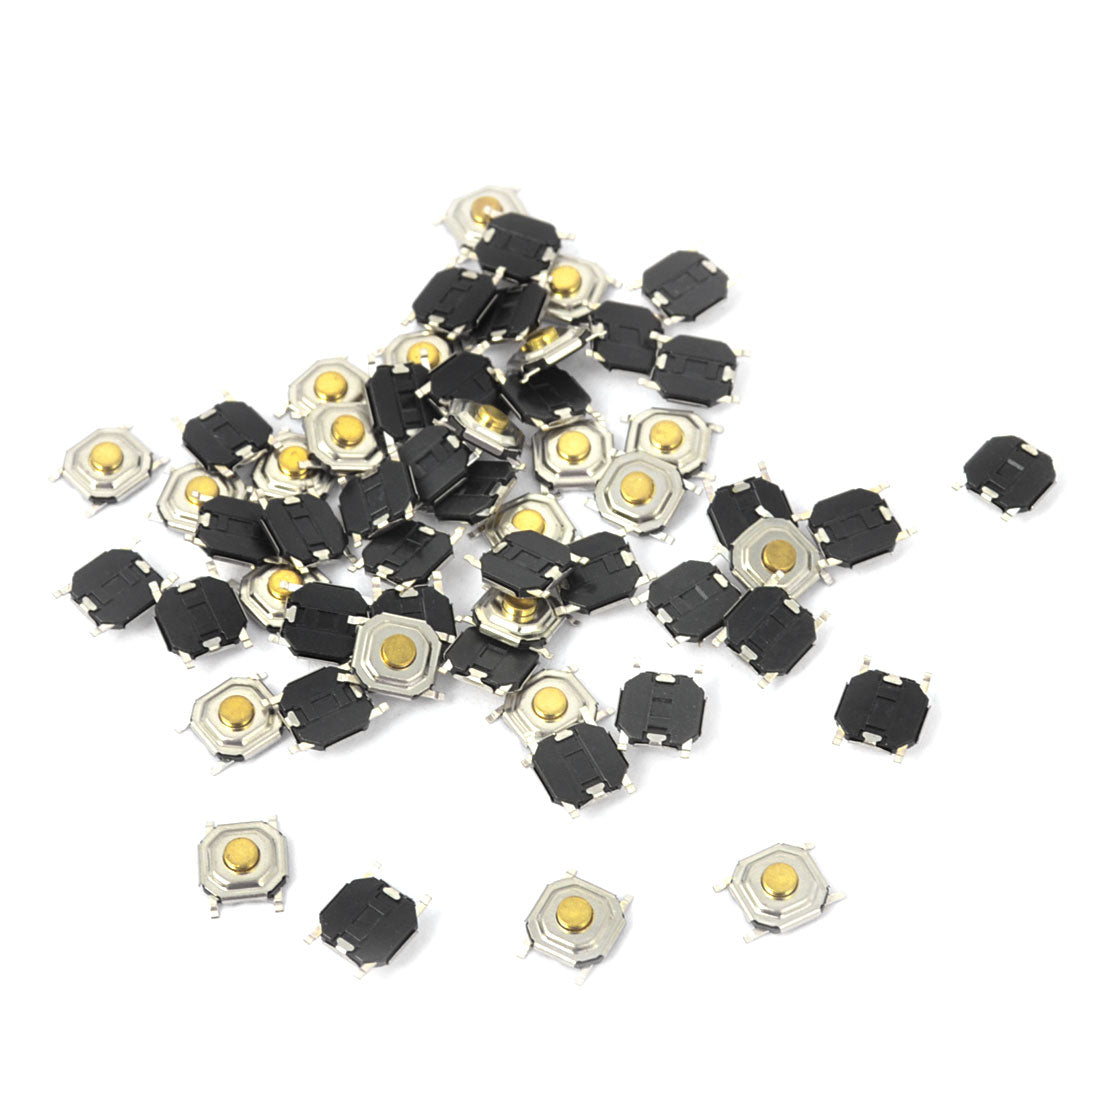 uxcell Uxcell 55Pcs Momentary Tact Tactile Push Button Switch 4mmx4mmx1.7mm 4-pin